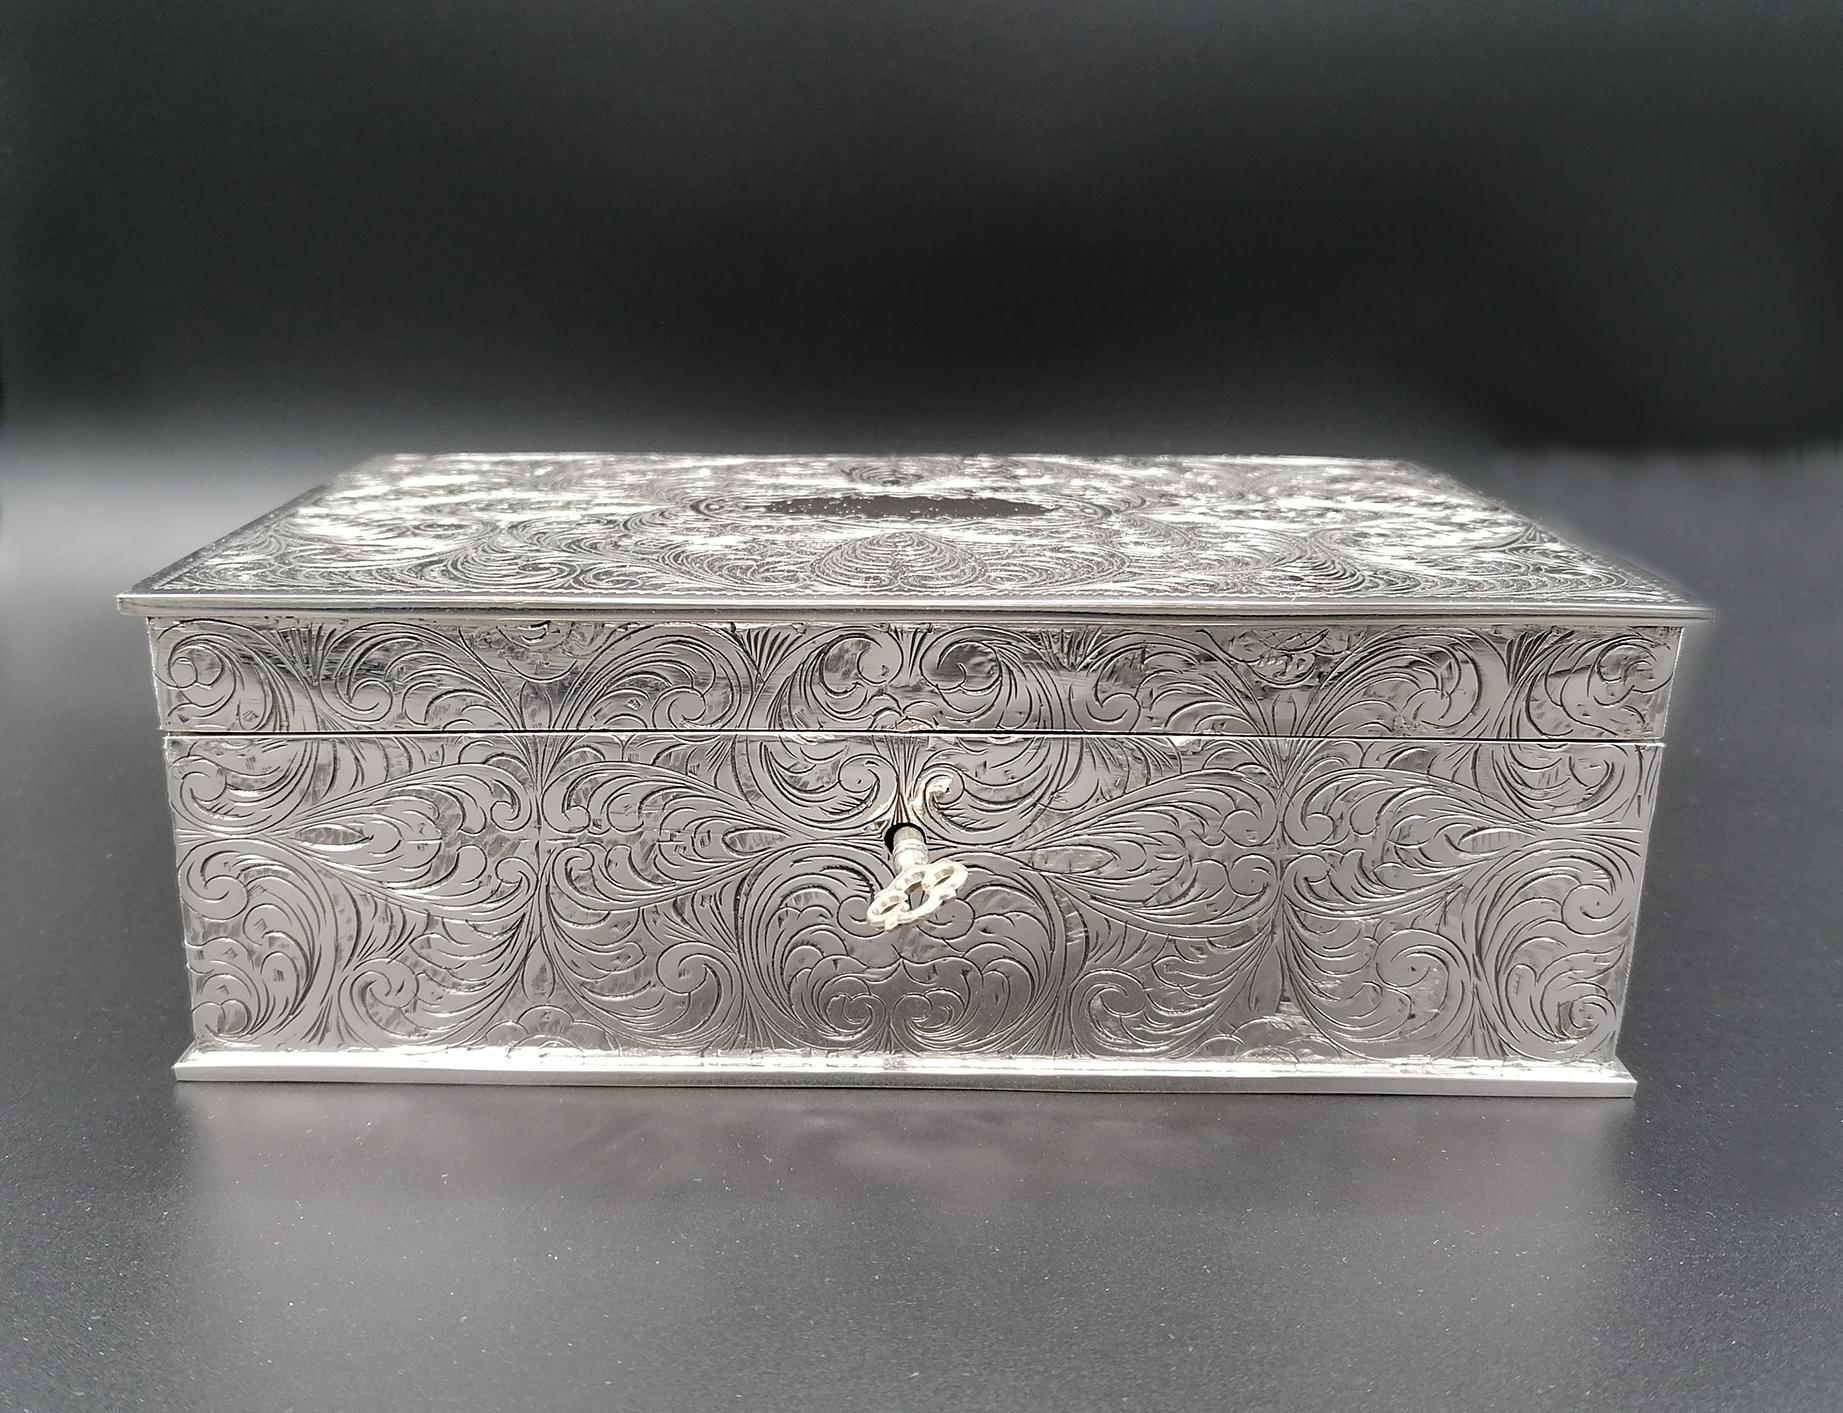 Renaissance 20th Century Solid Silver Engraved Jewelry Box